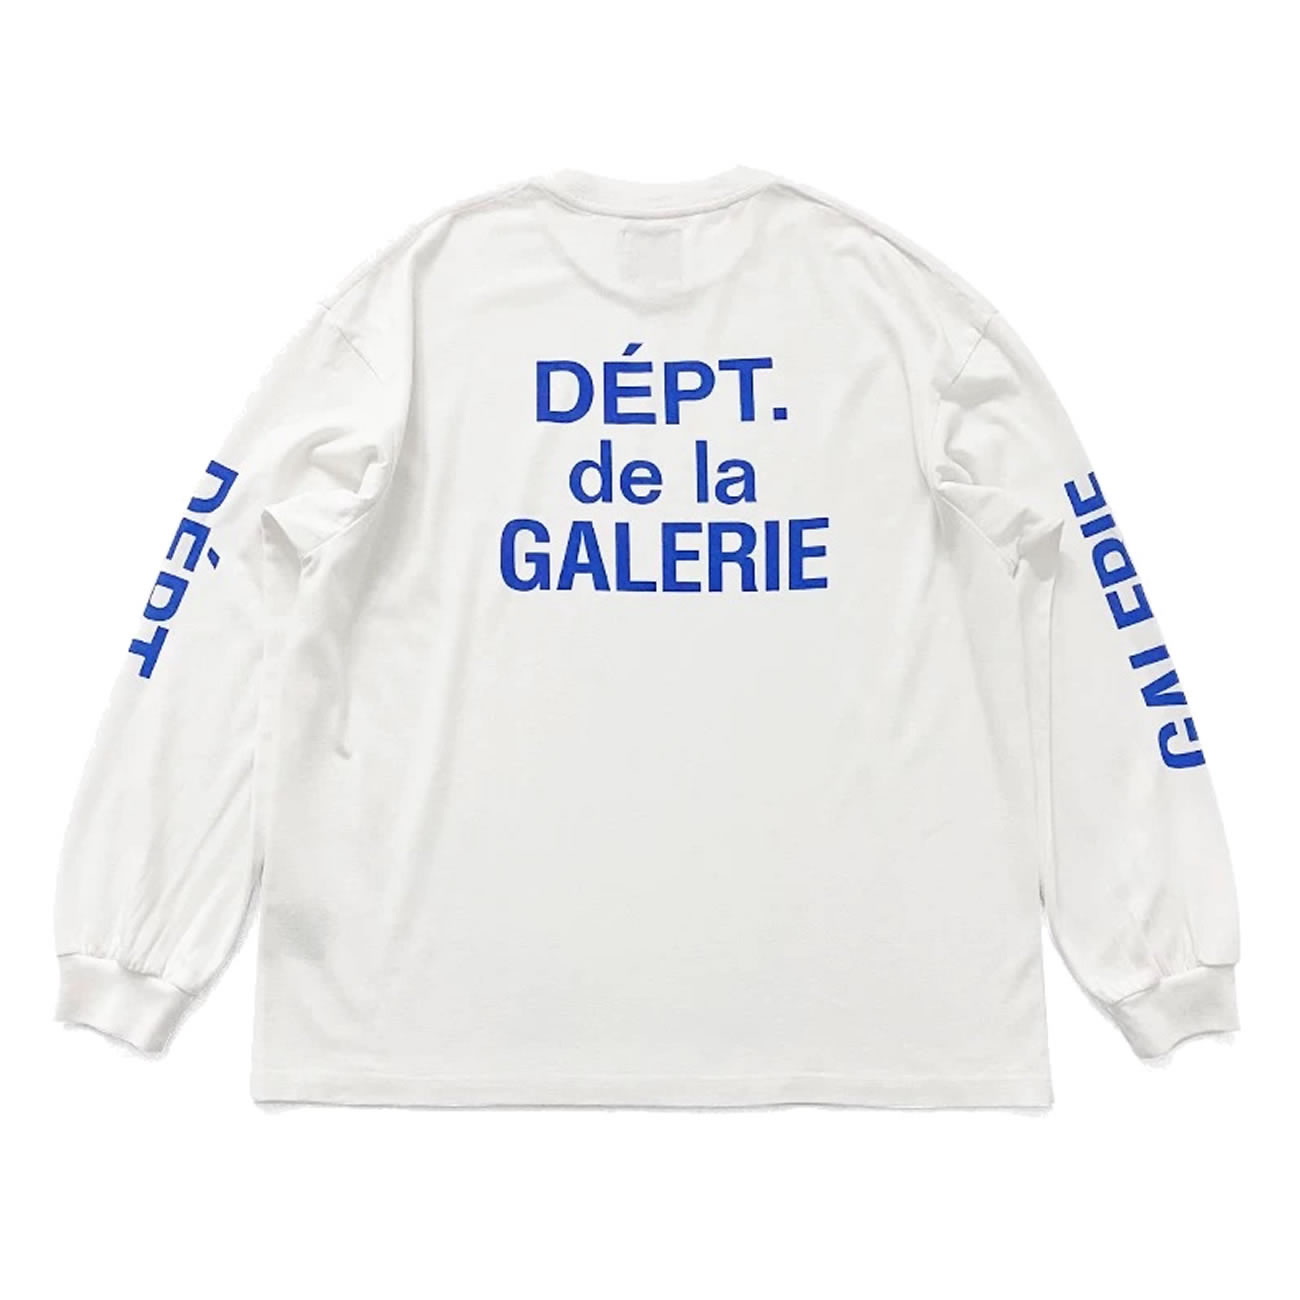 Gallery Dept. French Collector L S Tee White Blue Fw21 (1) - newkick.org